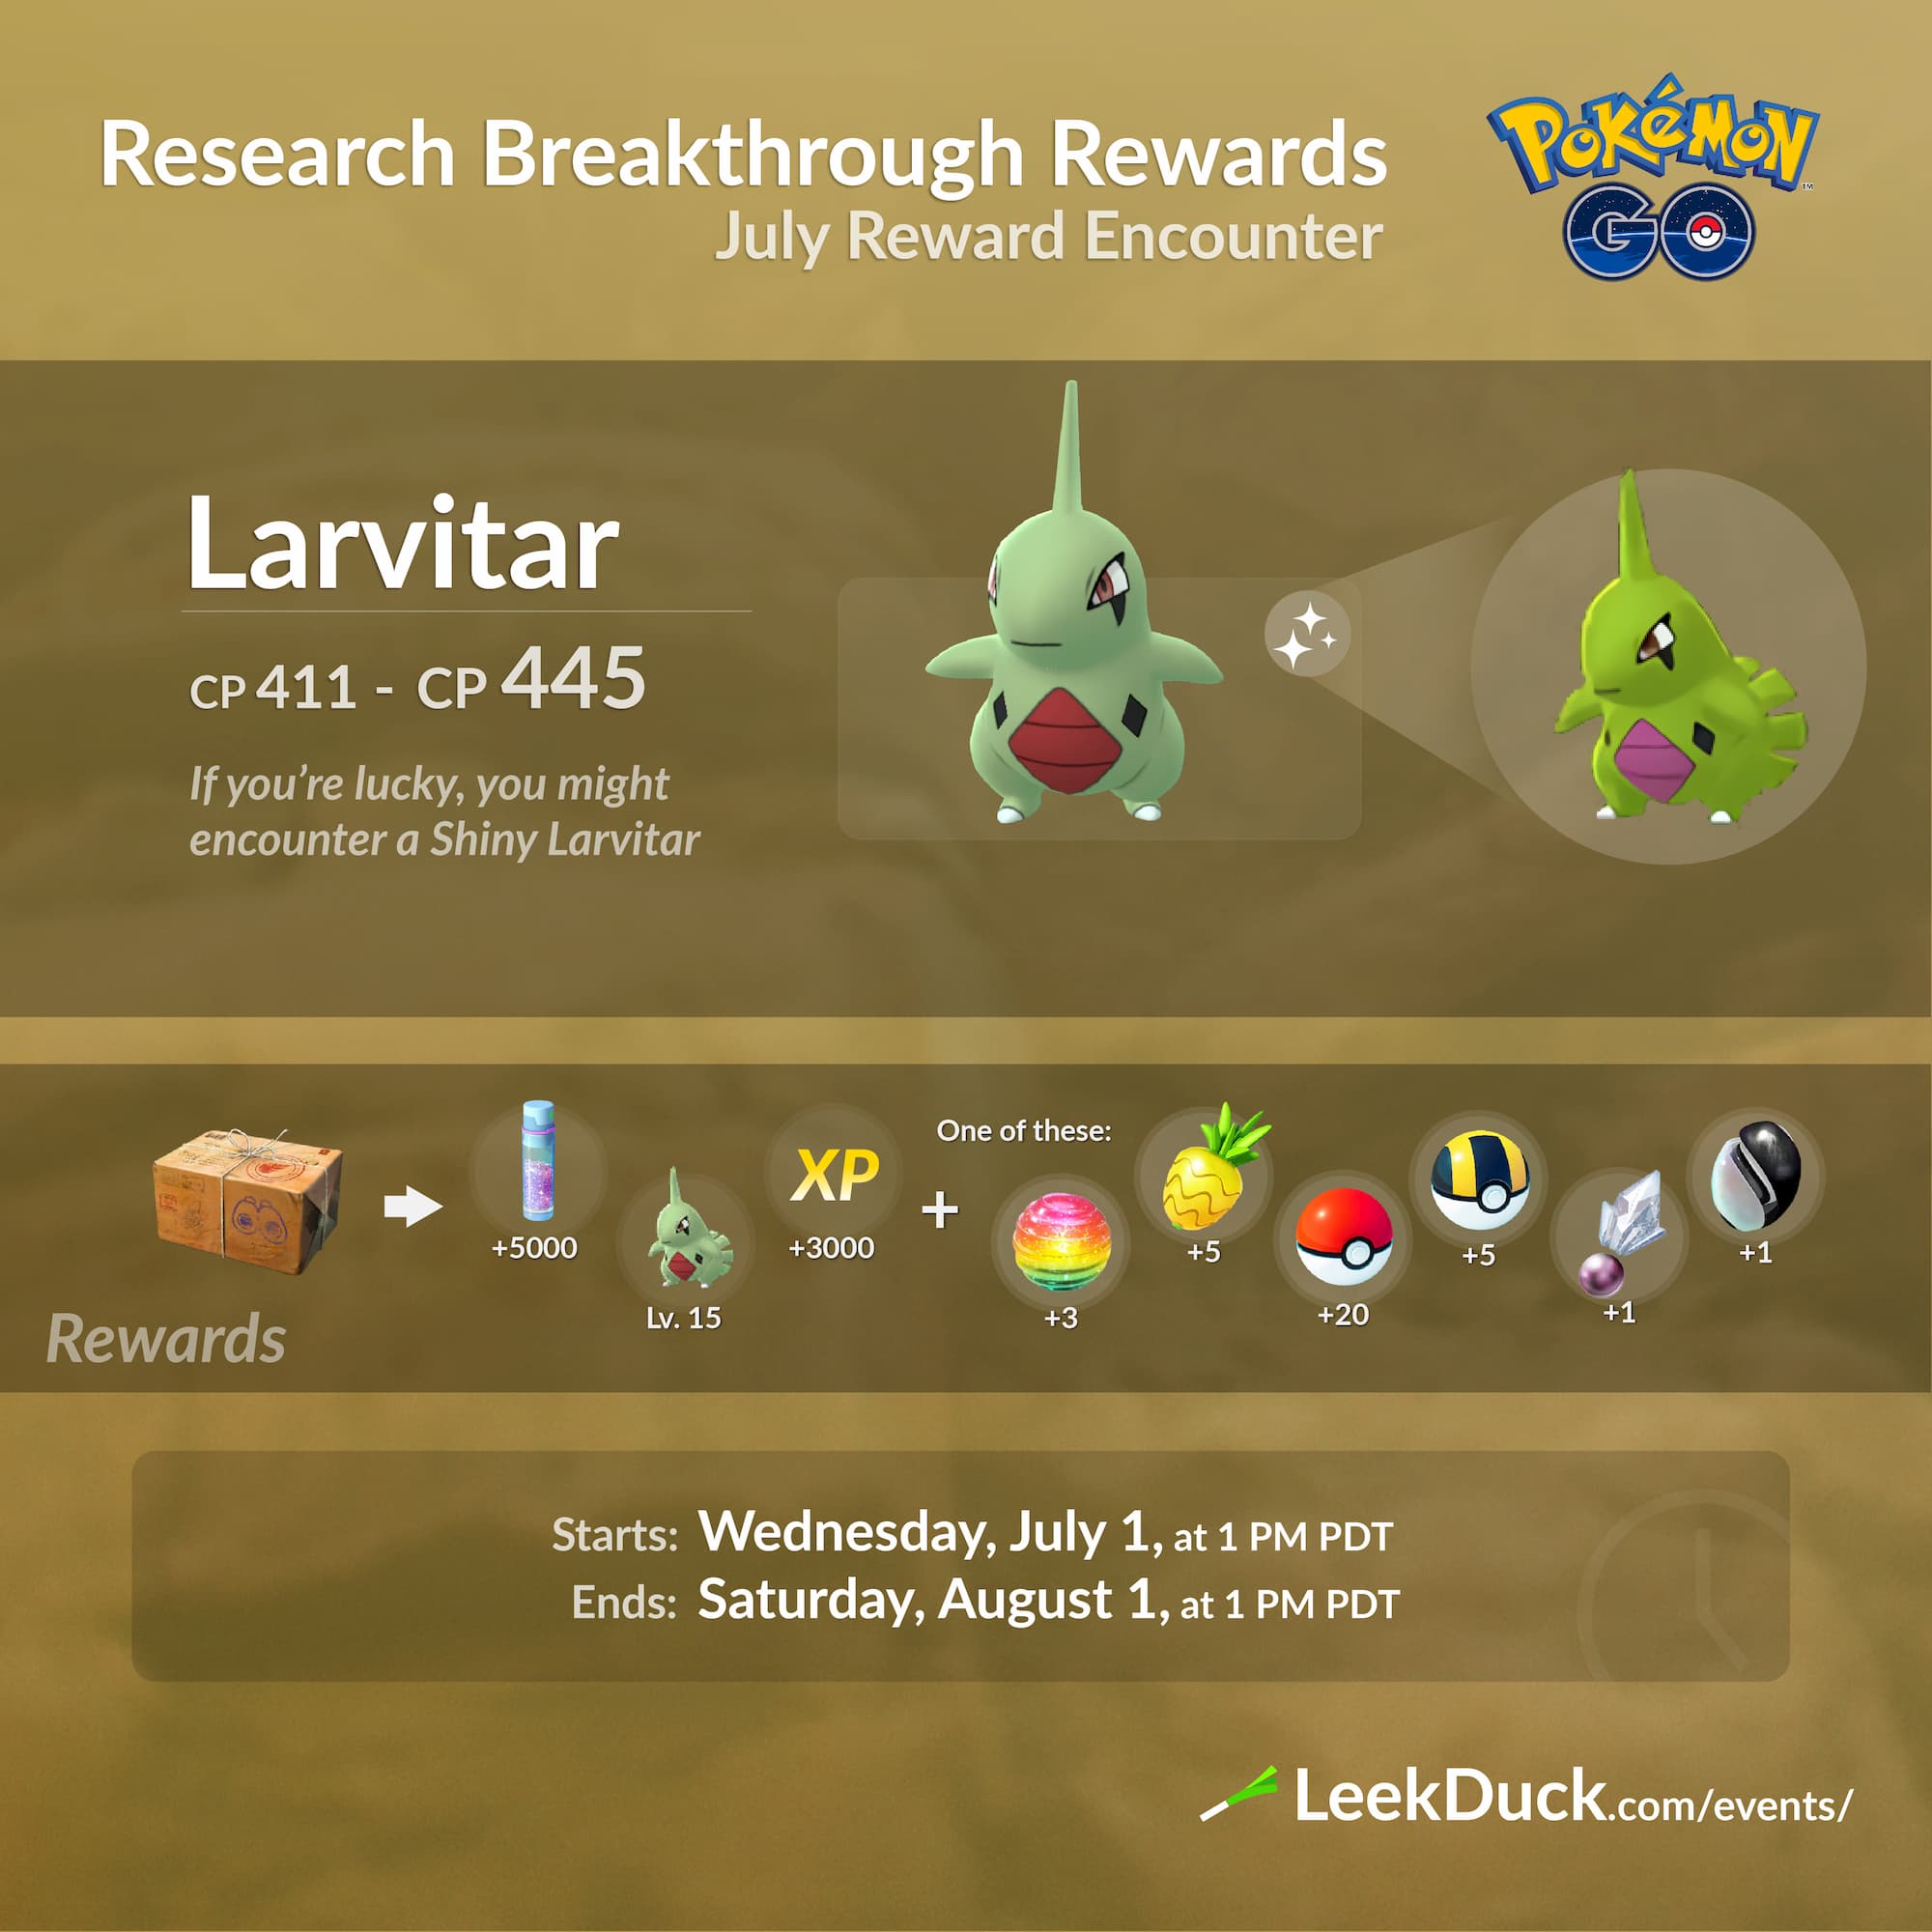 July Research Breakthrough - Leek Duck | Pokémon GO News and Resources